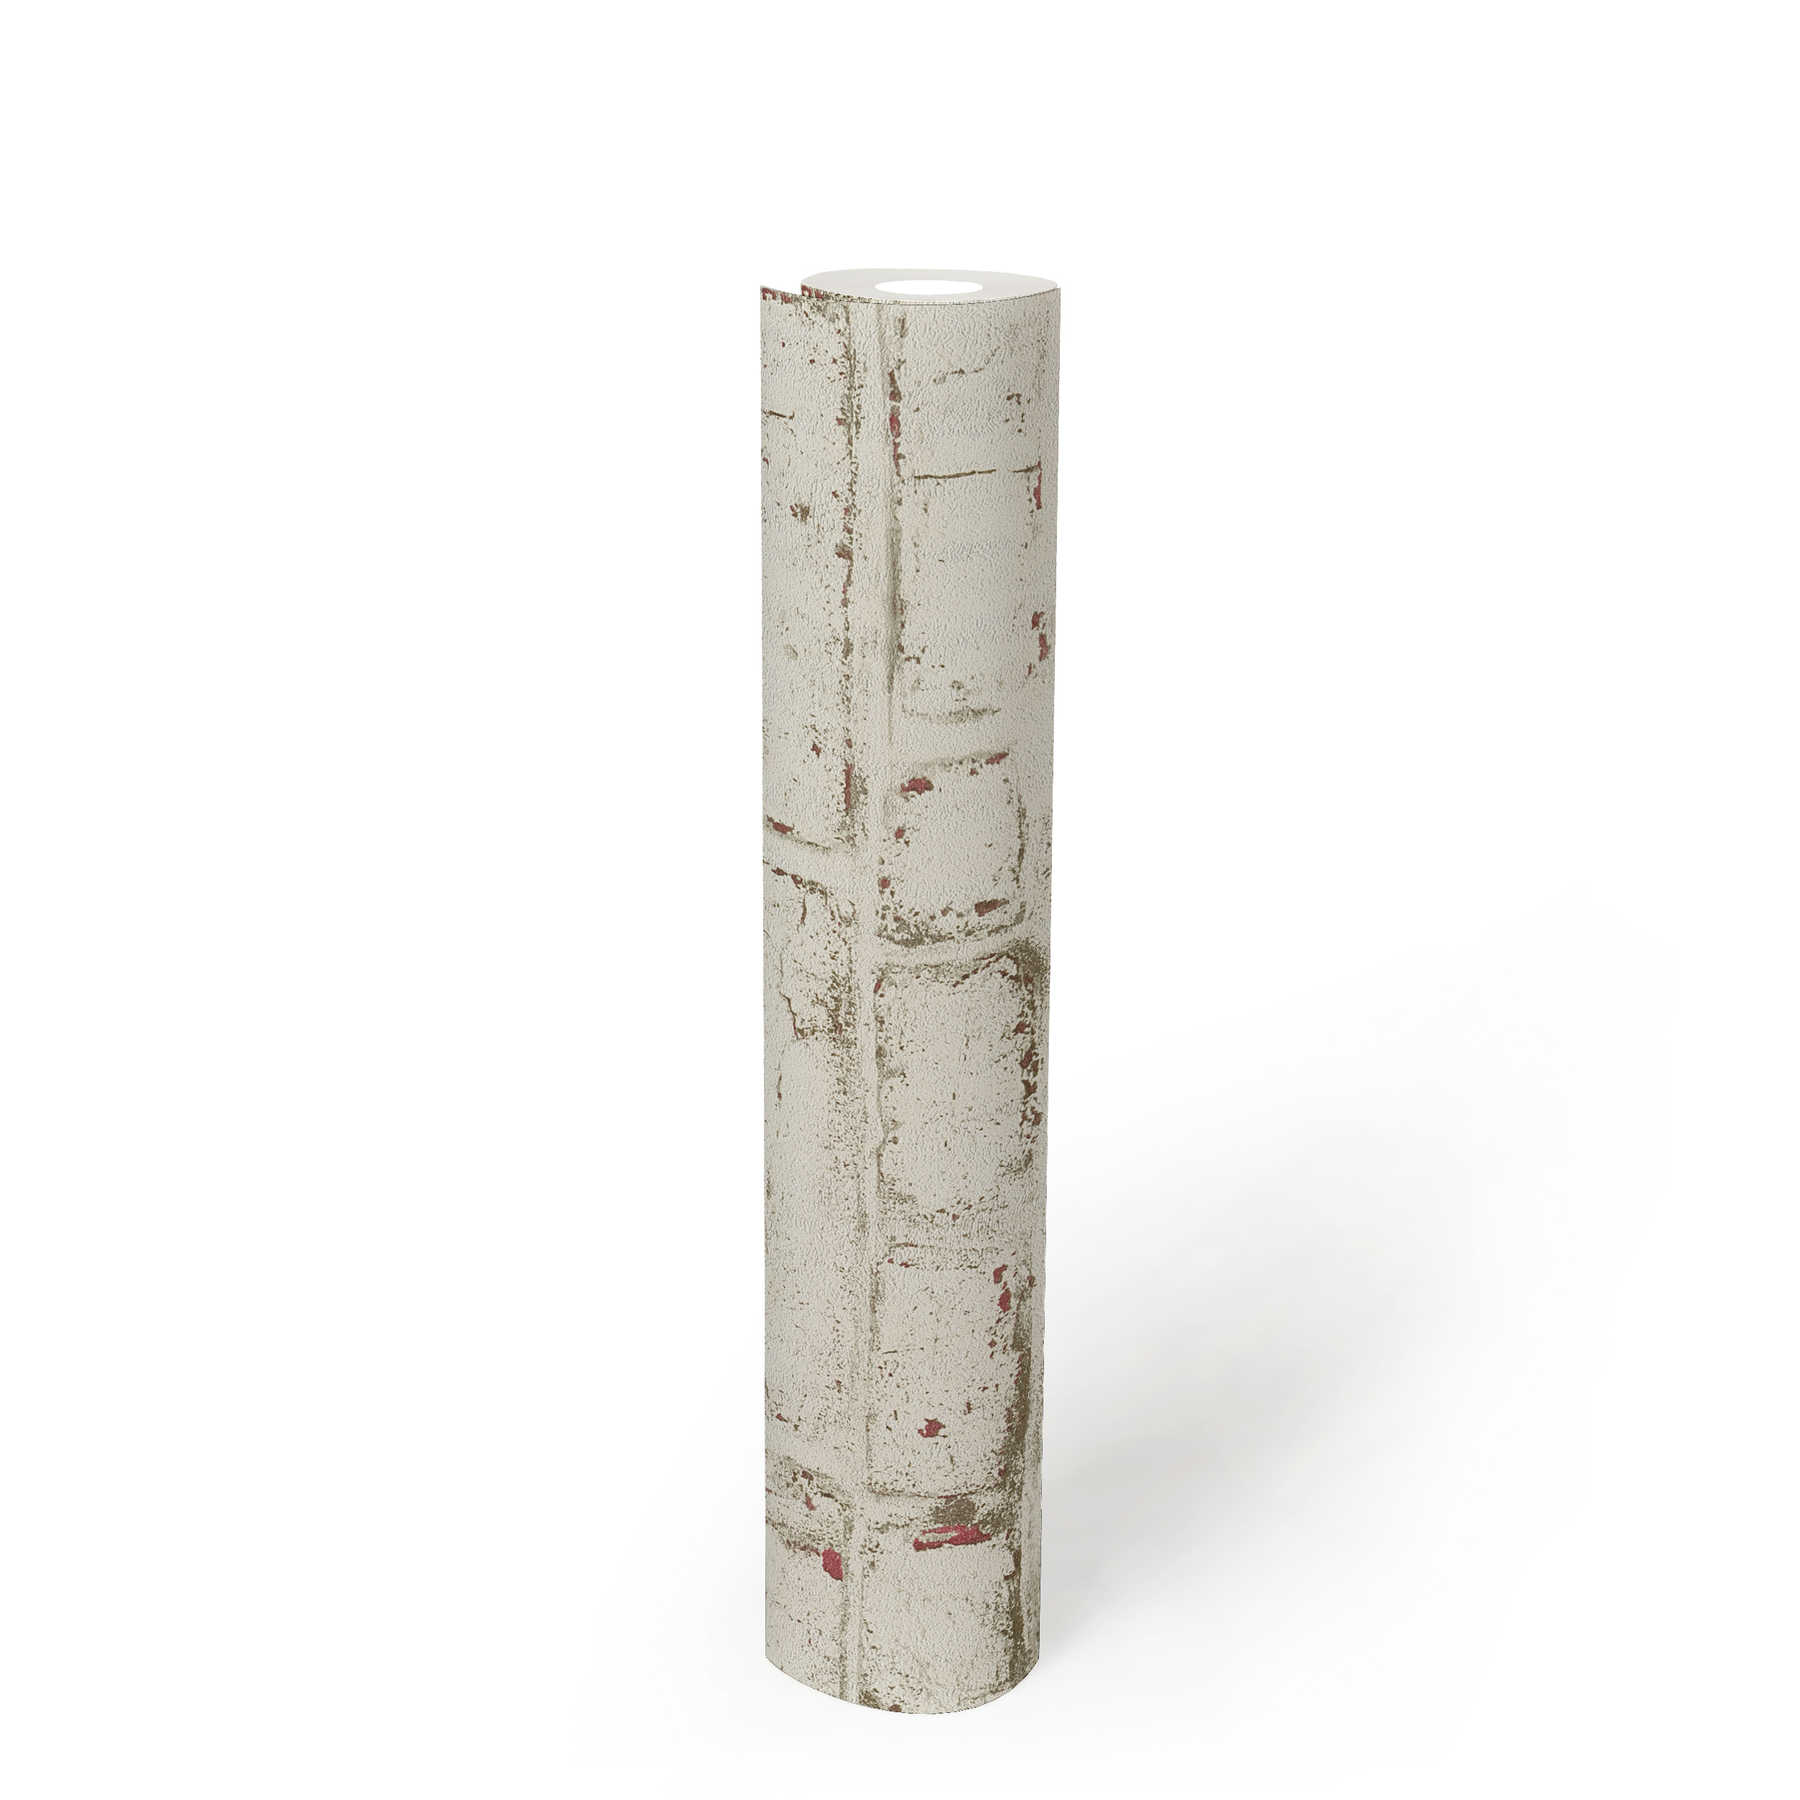             Stone look wallpaper with white brick in vintage look - white, red, beige
        